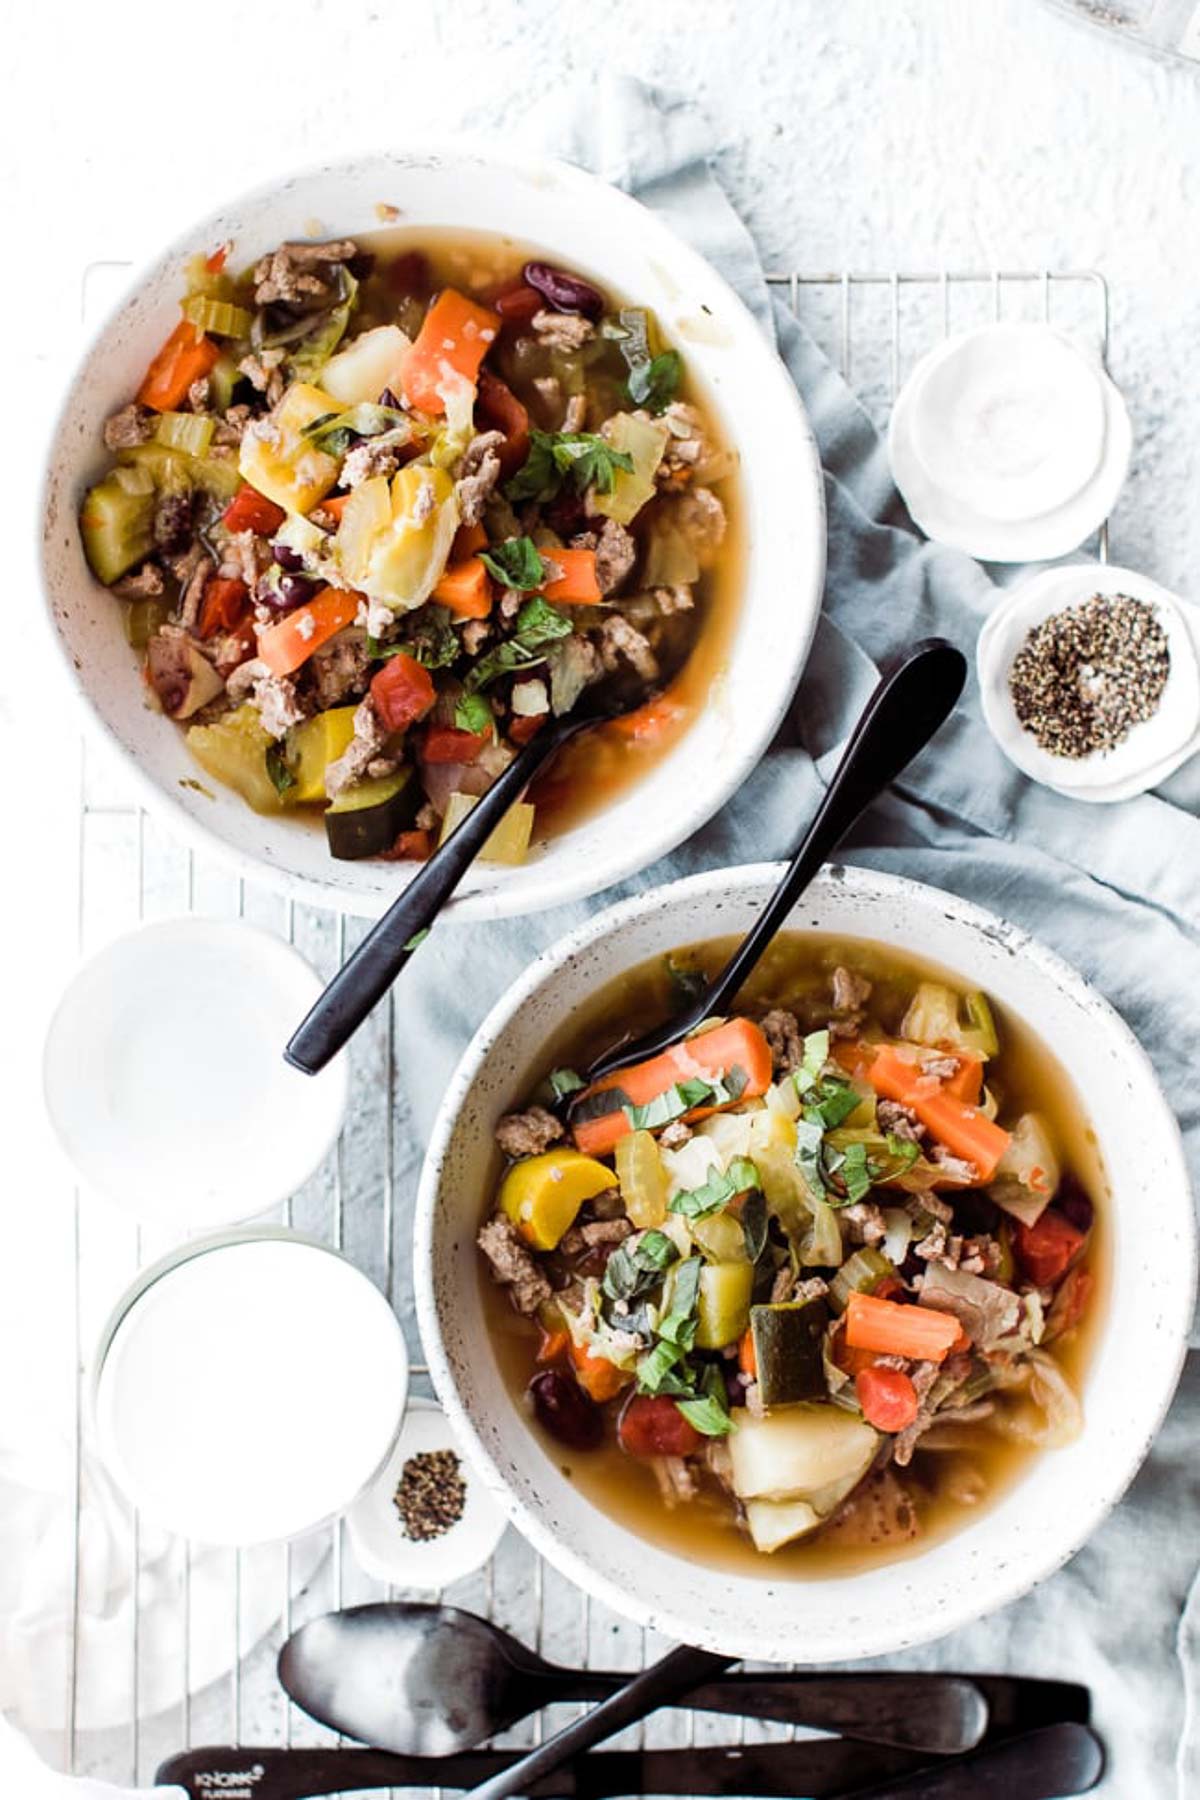 Overhead image of two bowls of weight loss soup on the table with spoons.